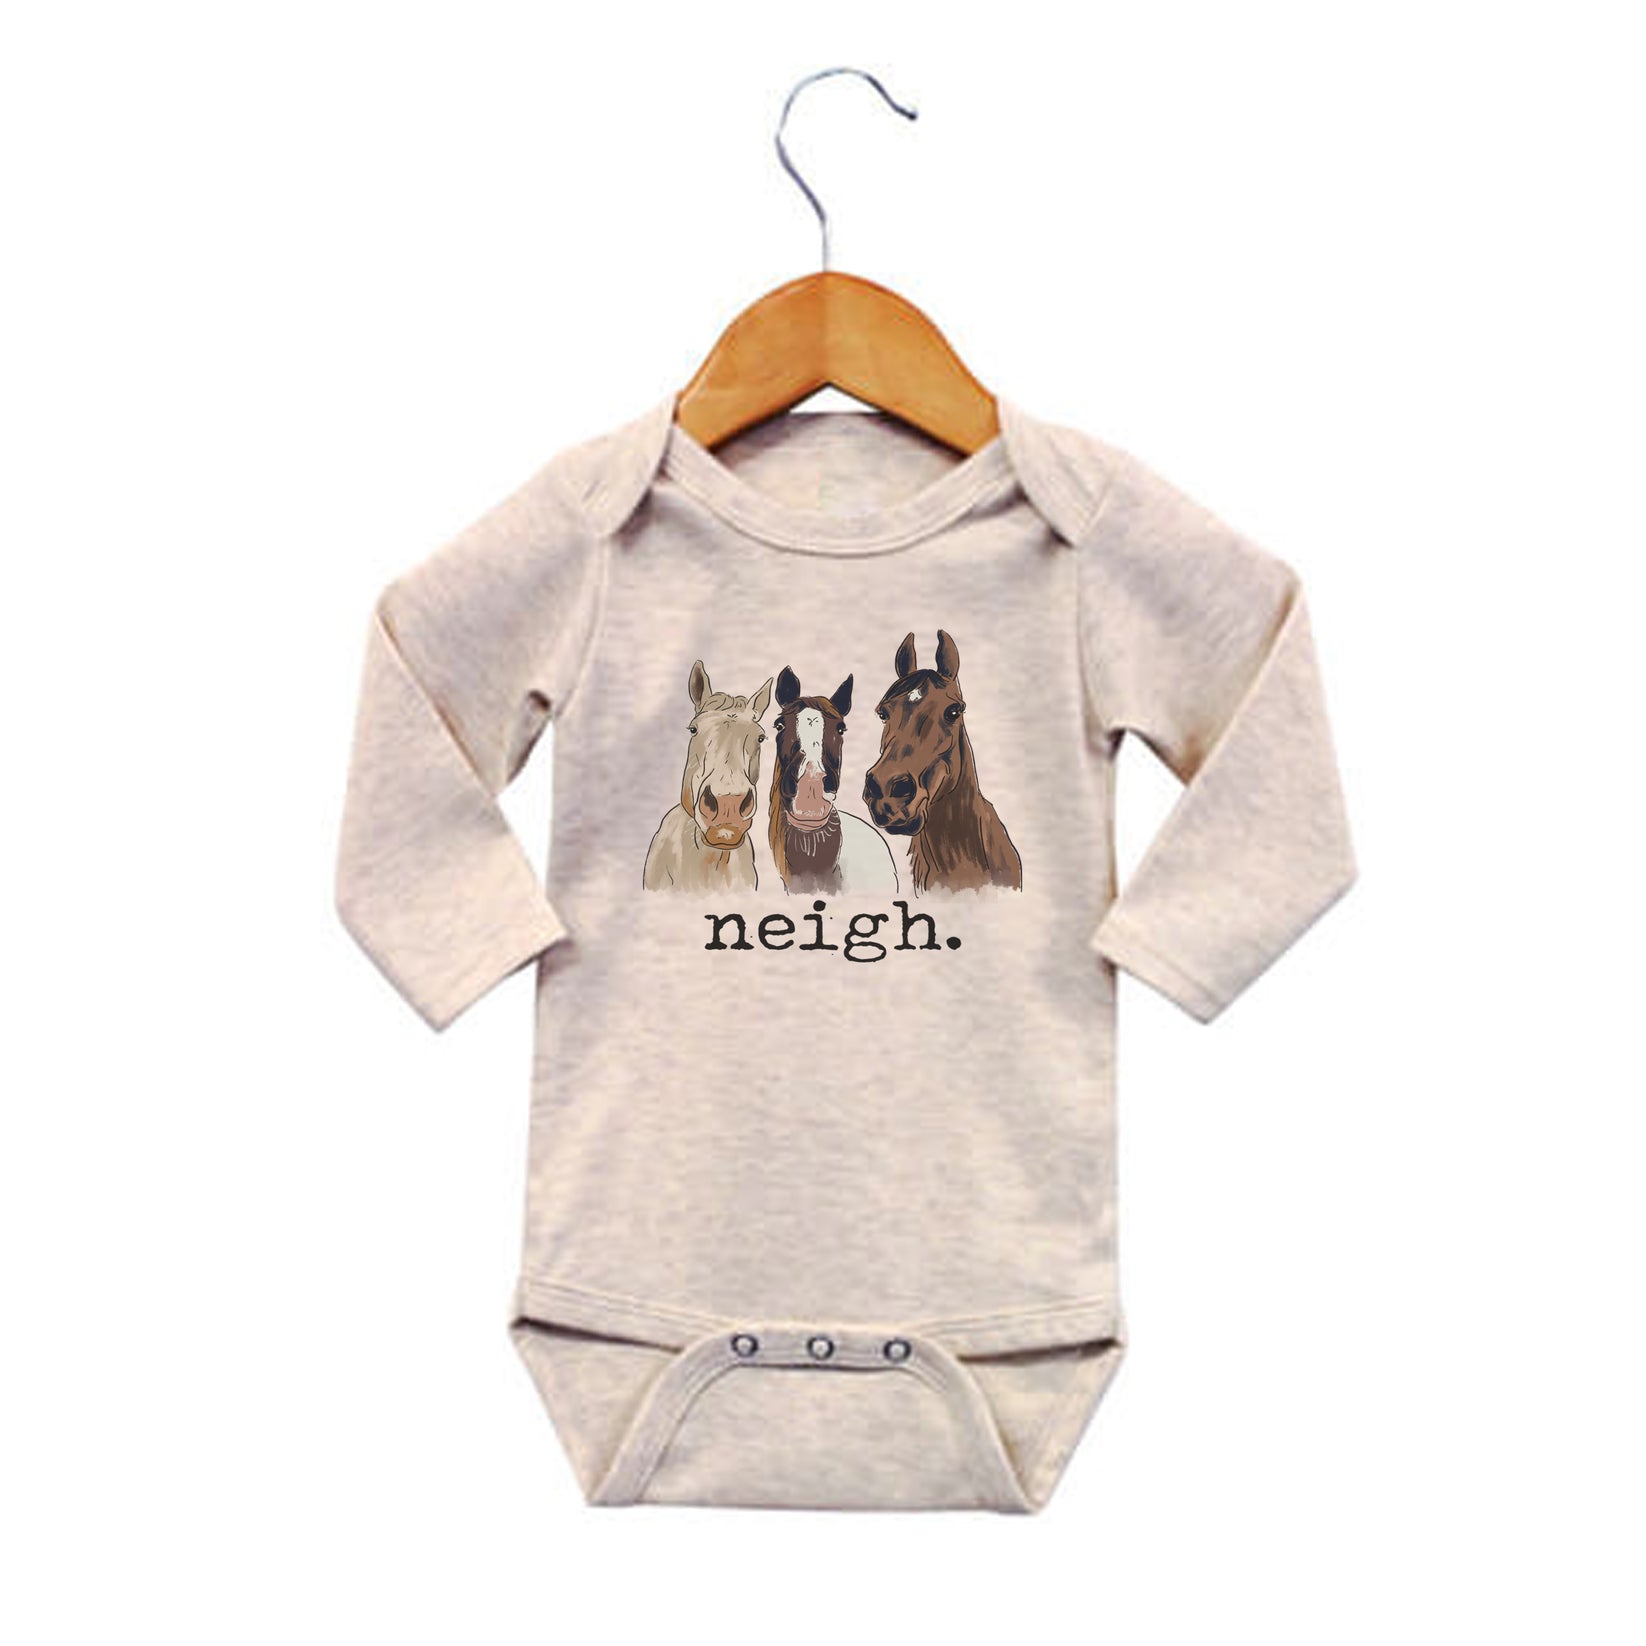 "Neigh" Three Horse Baby Body Suit Long sleeves